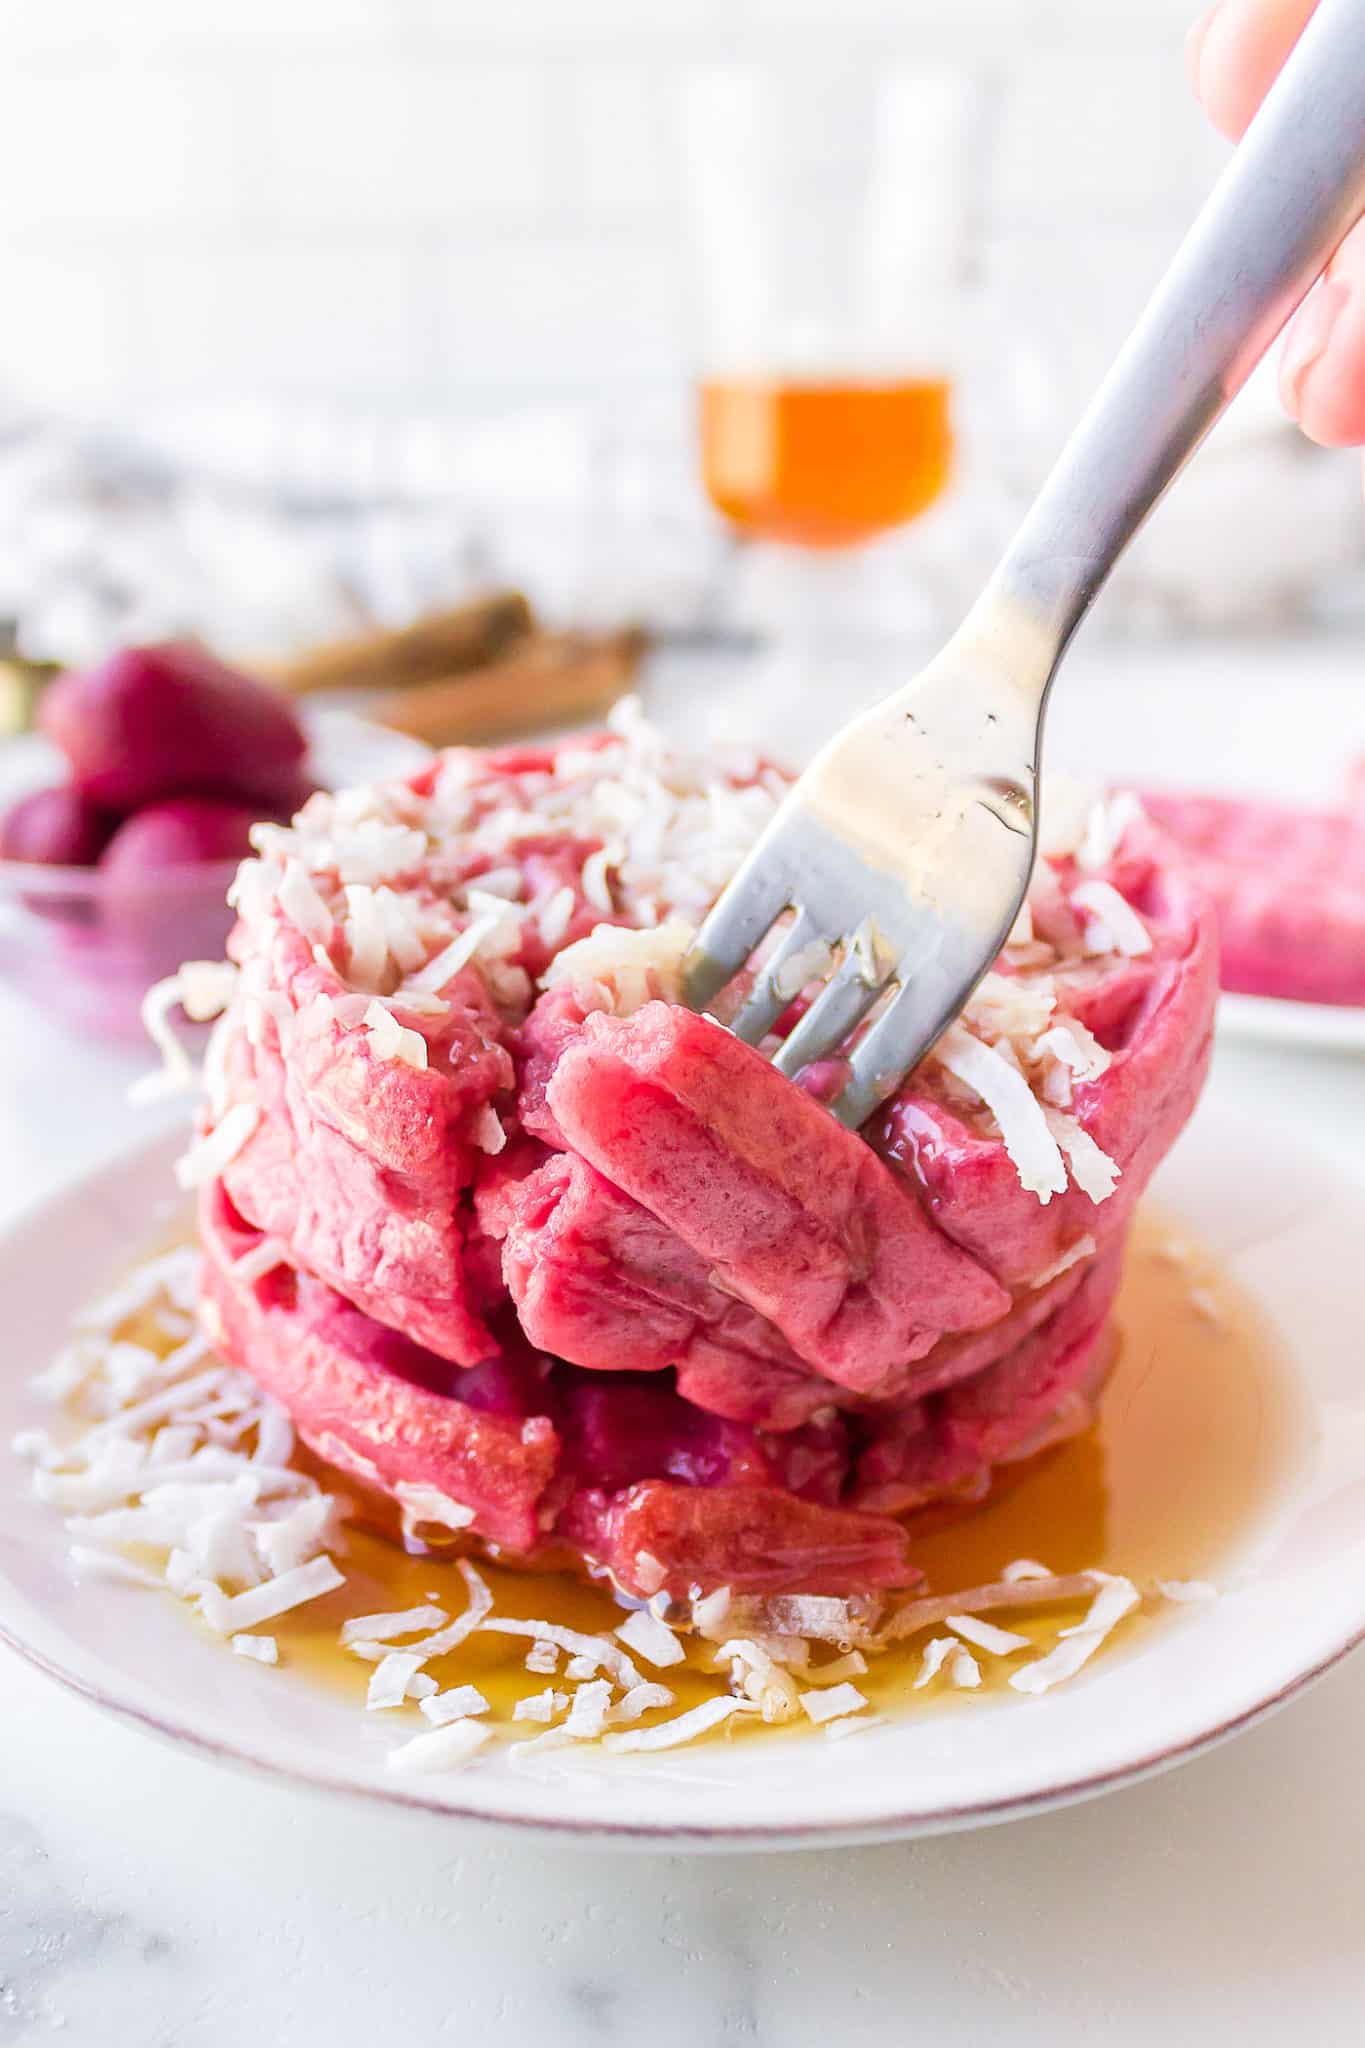 A fork picking up a bite of pink waffles from a syrup coated stack.